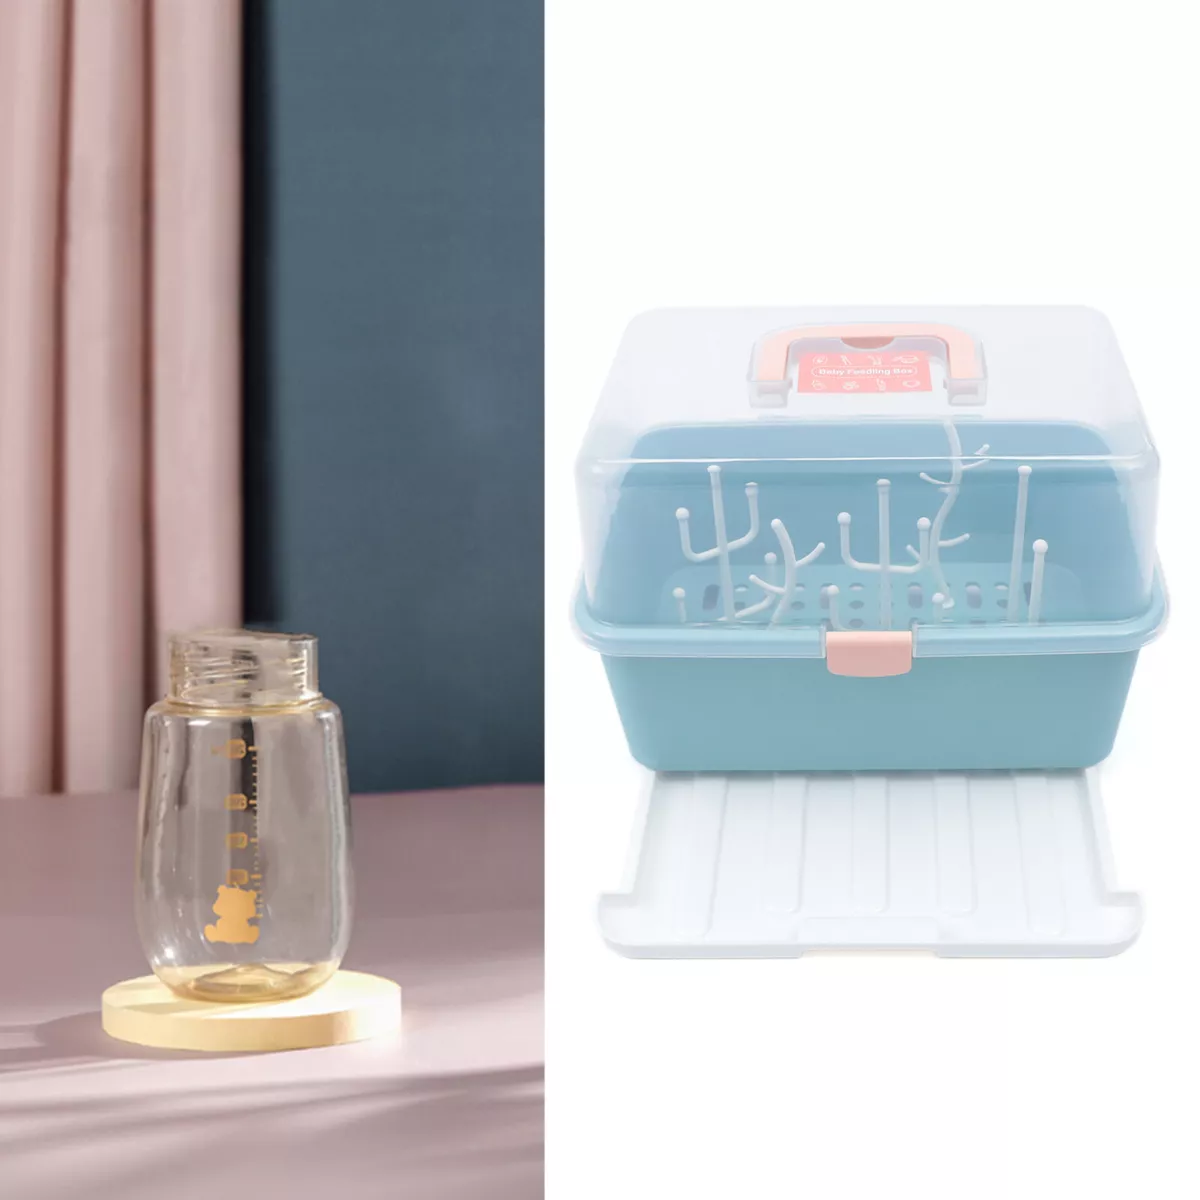 Infant Milk Bottle Storage Box With Cover And Drain Rack, Plastic